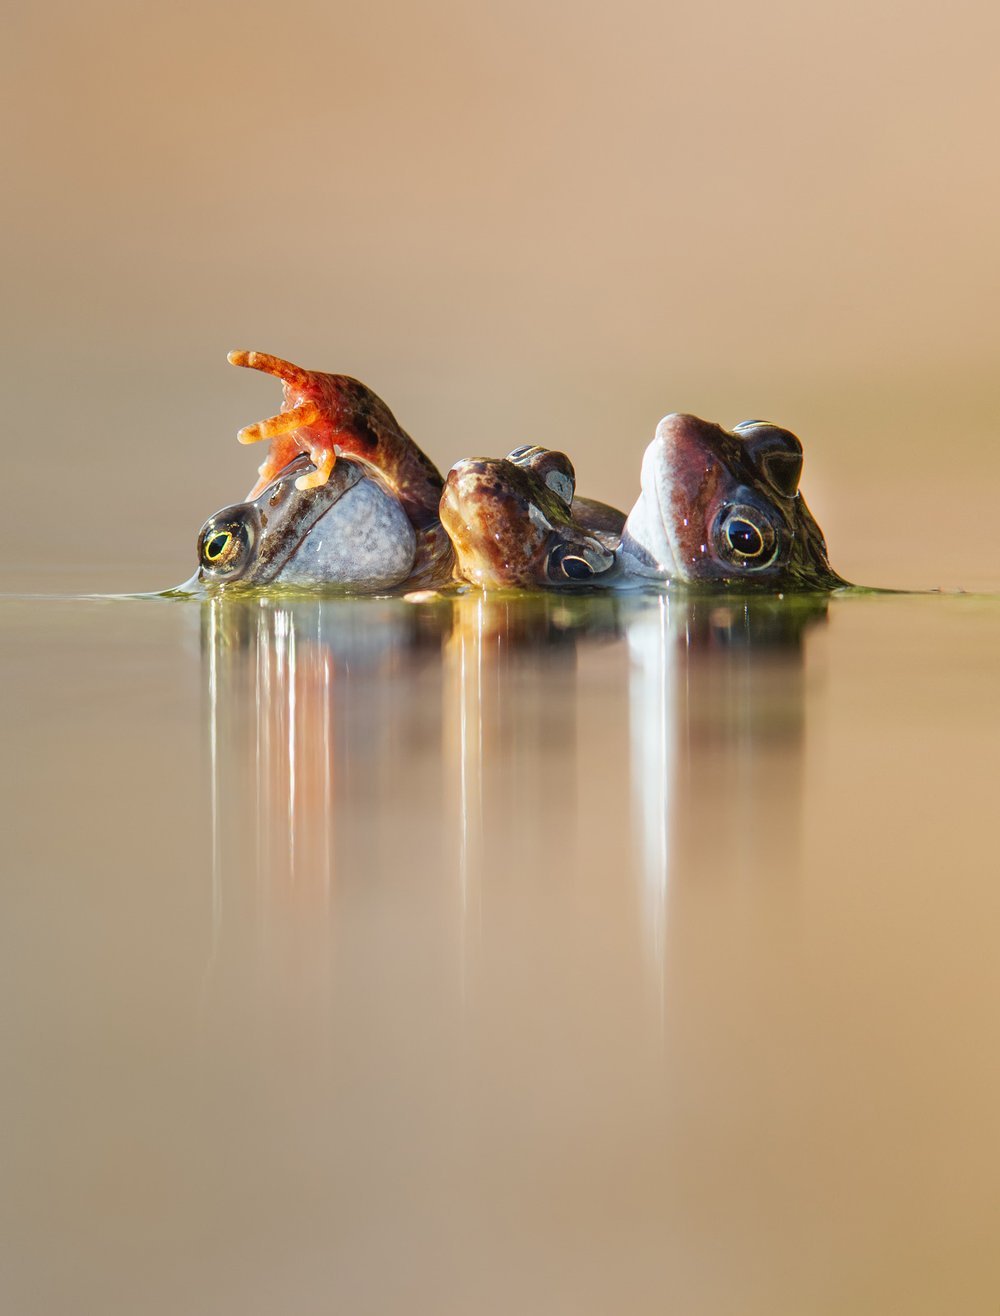 Ian Mason's "Three Frogs in Amplexus" captures common frogs in Perthshire, Scotland, winning the category. (Photo: www.bwpawards.org)